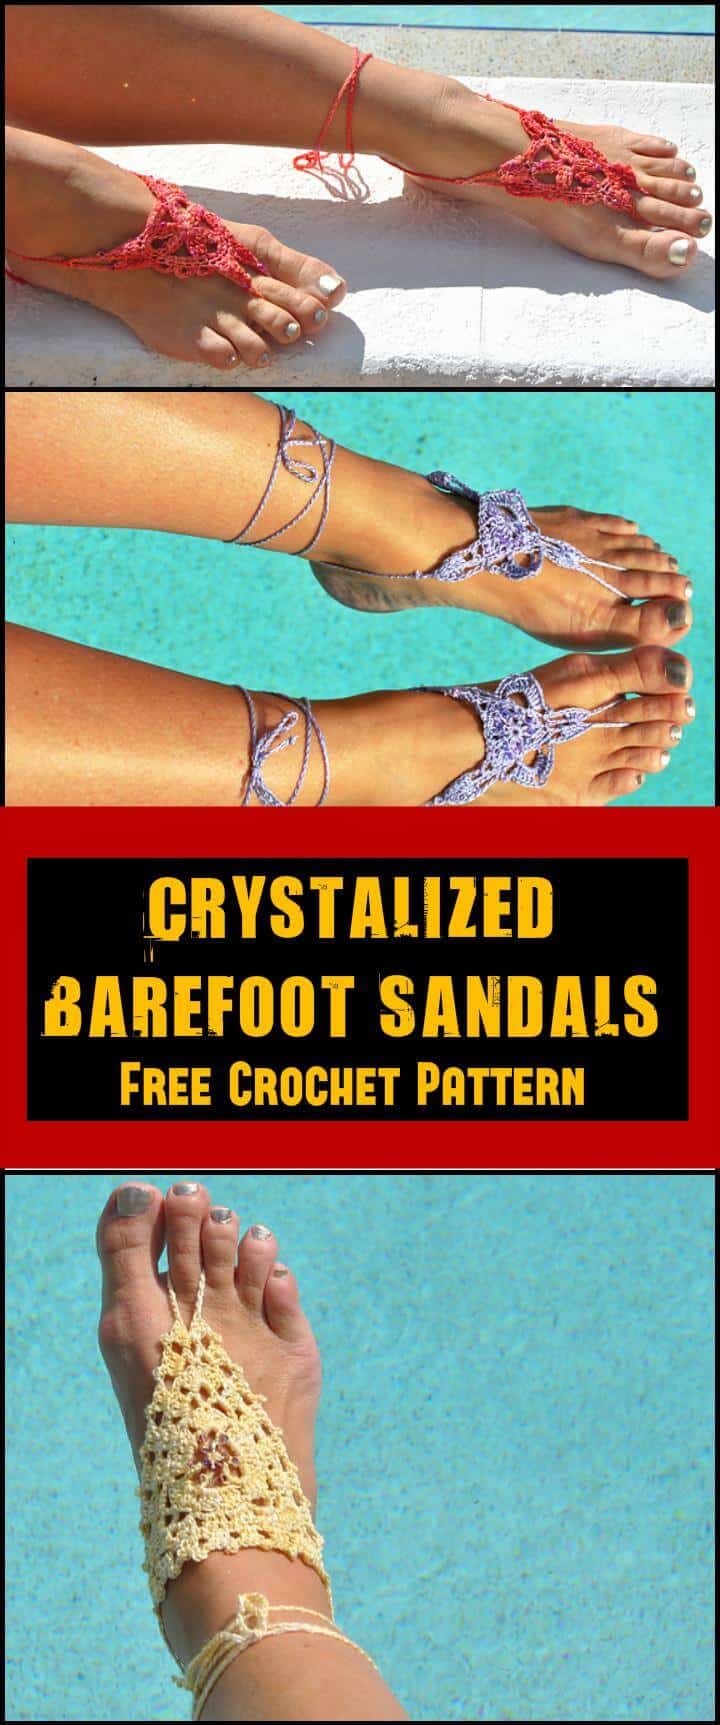 Crystalized Barefoot Sandals Free Crochet Pattern